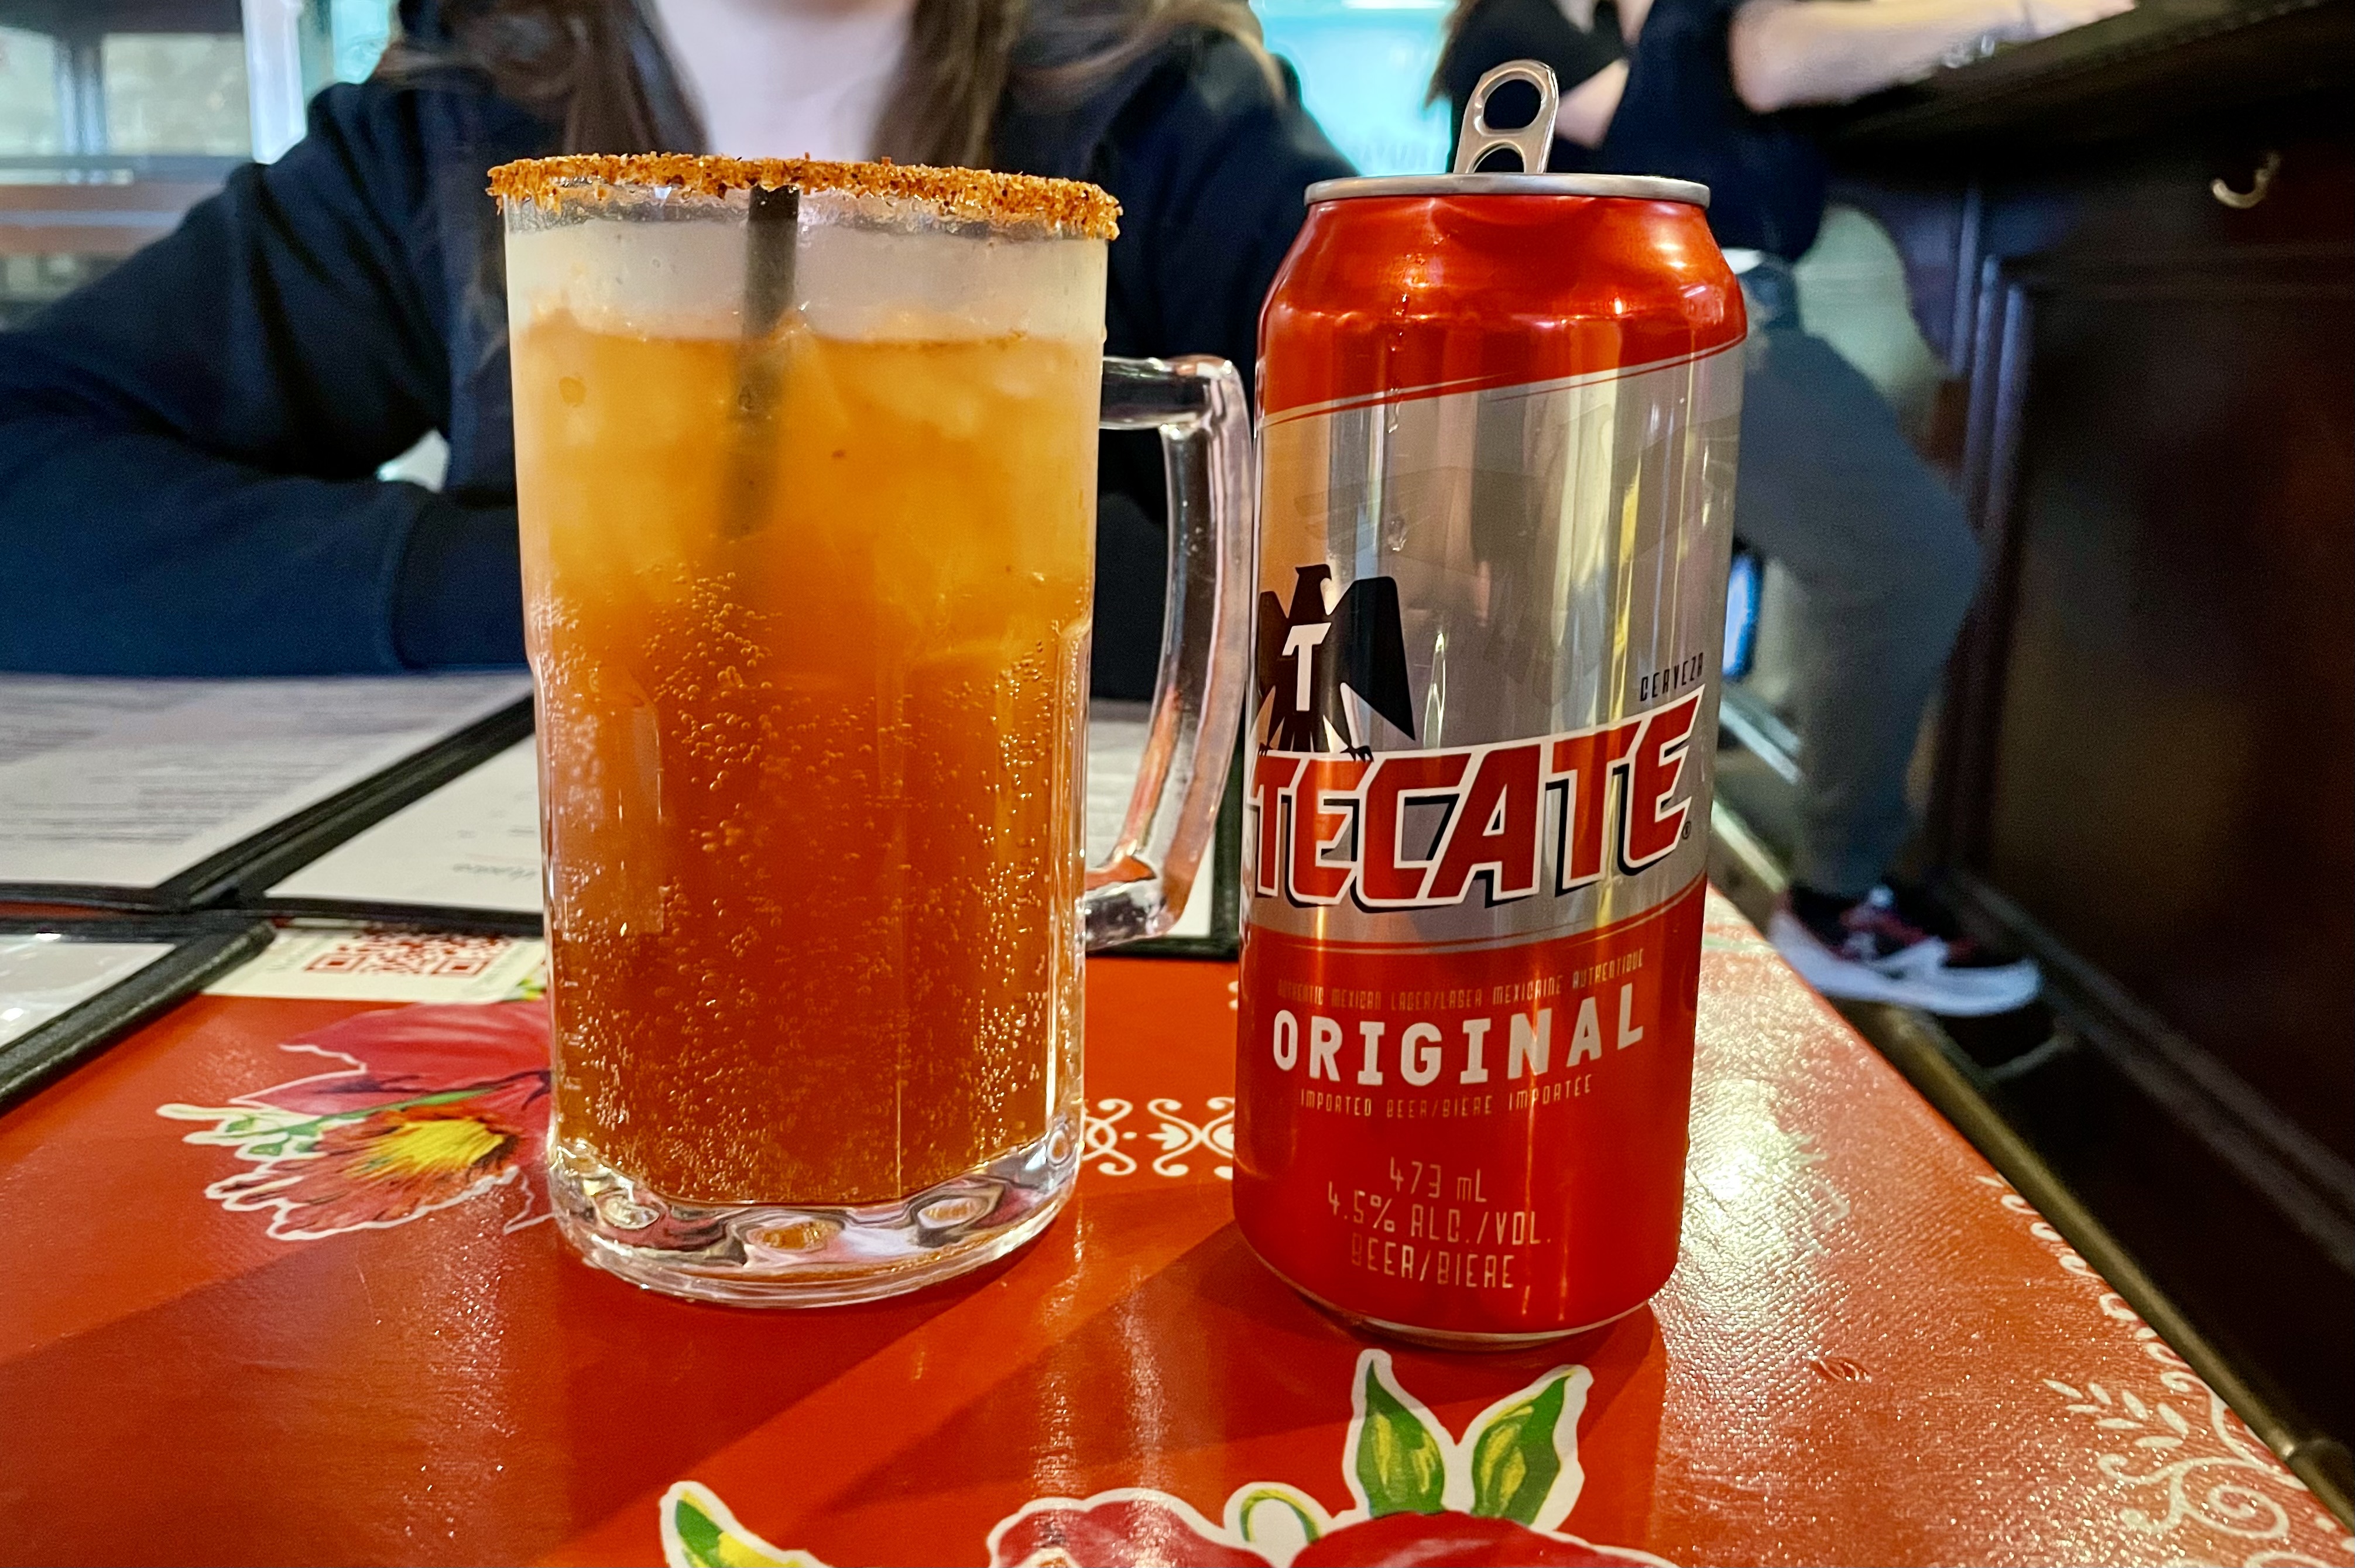 A michelada is a Mexican drink made with beer, lime juice, assorted sauces, spices, and chili peppers, served in a chilled, salt-rimmed glass